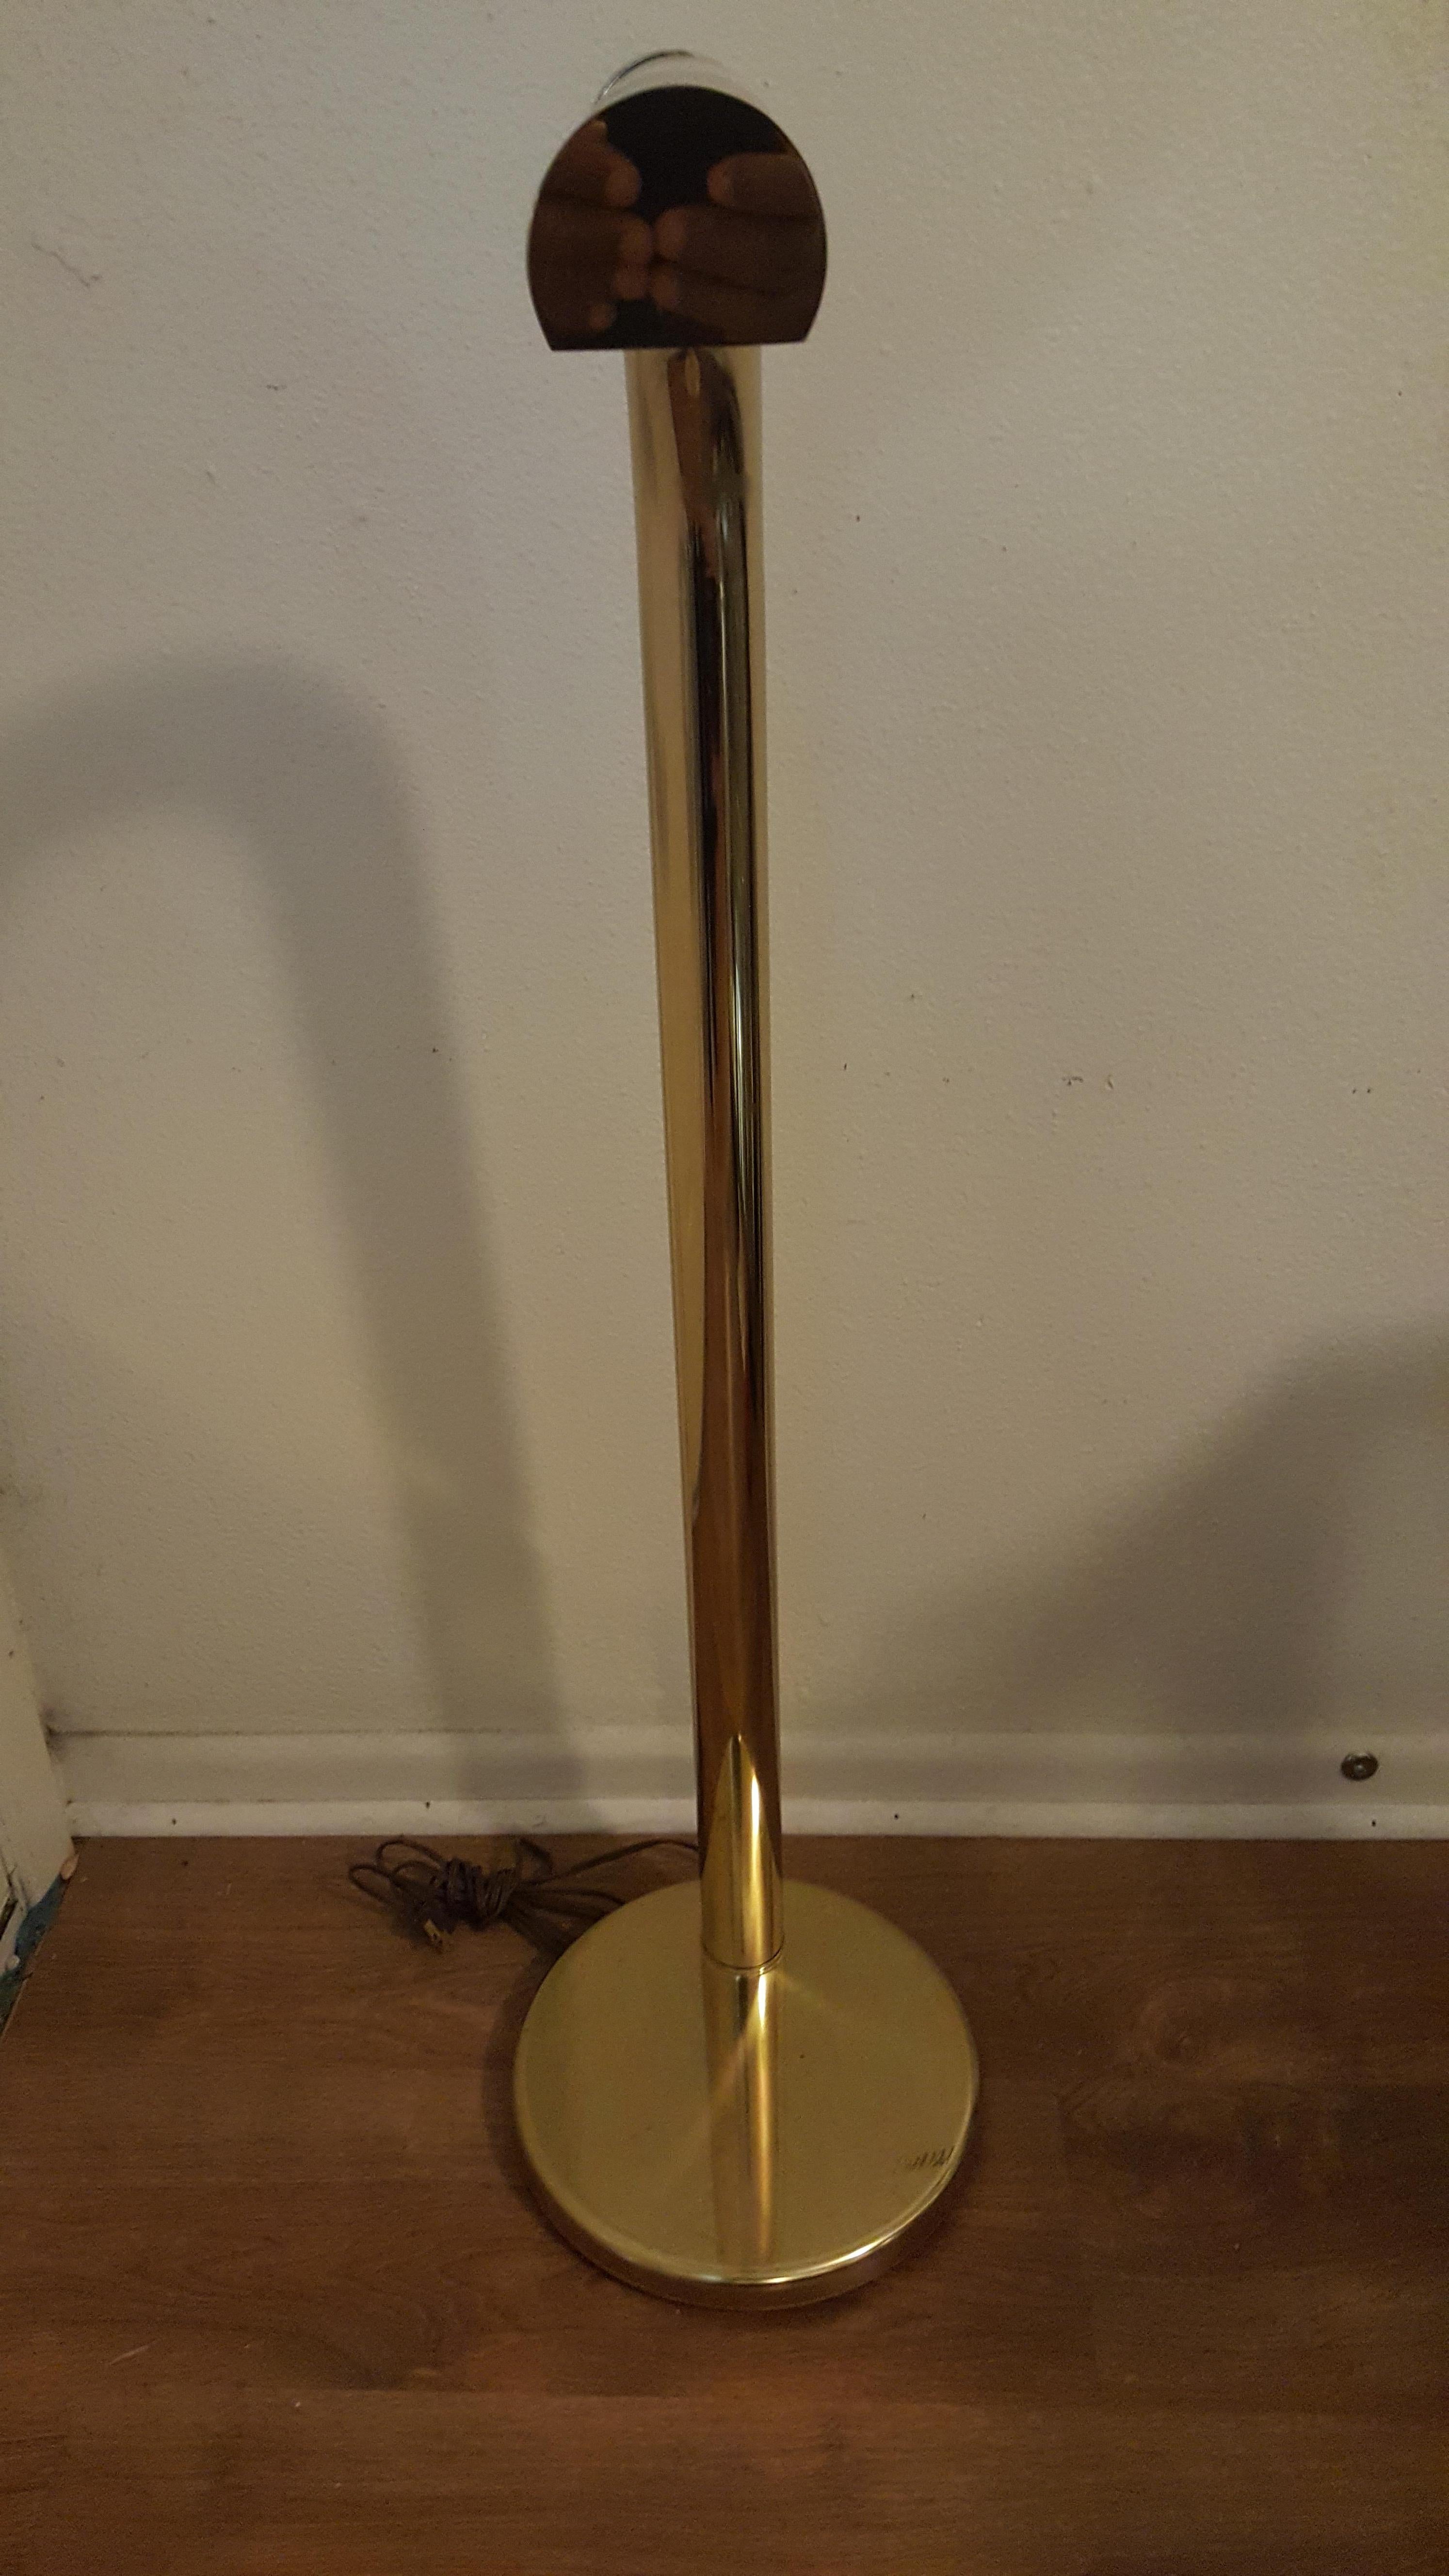 Groovy brass floor lamp by Jim Bindman for Rainbow lighting company in the late 1970s. Lamps has a round brass base that has a cylinder arm that has a waterfall neck where the light is hidden underneath the neck.